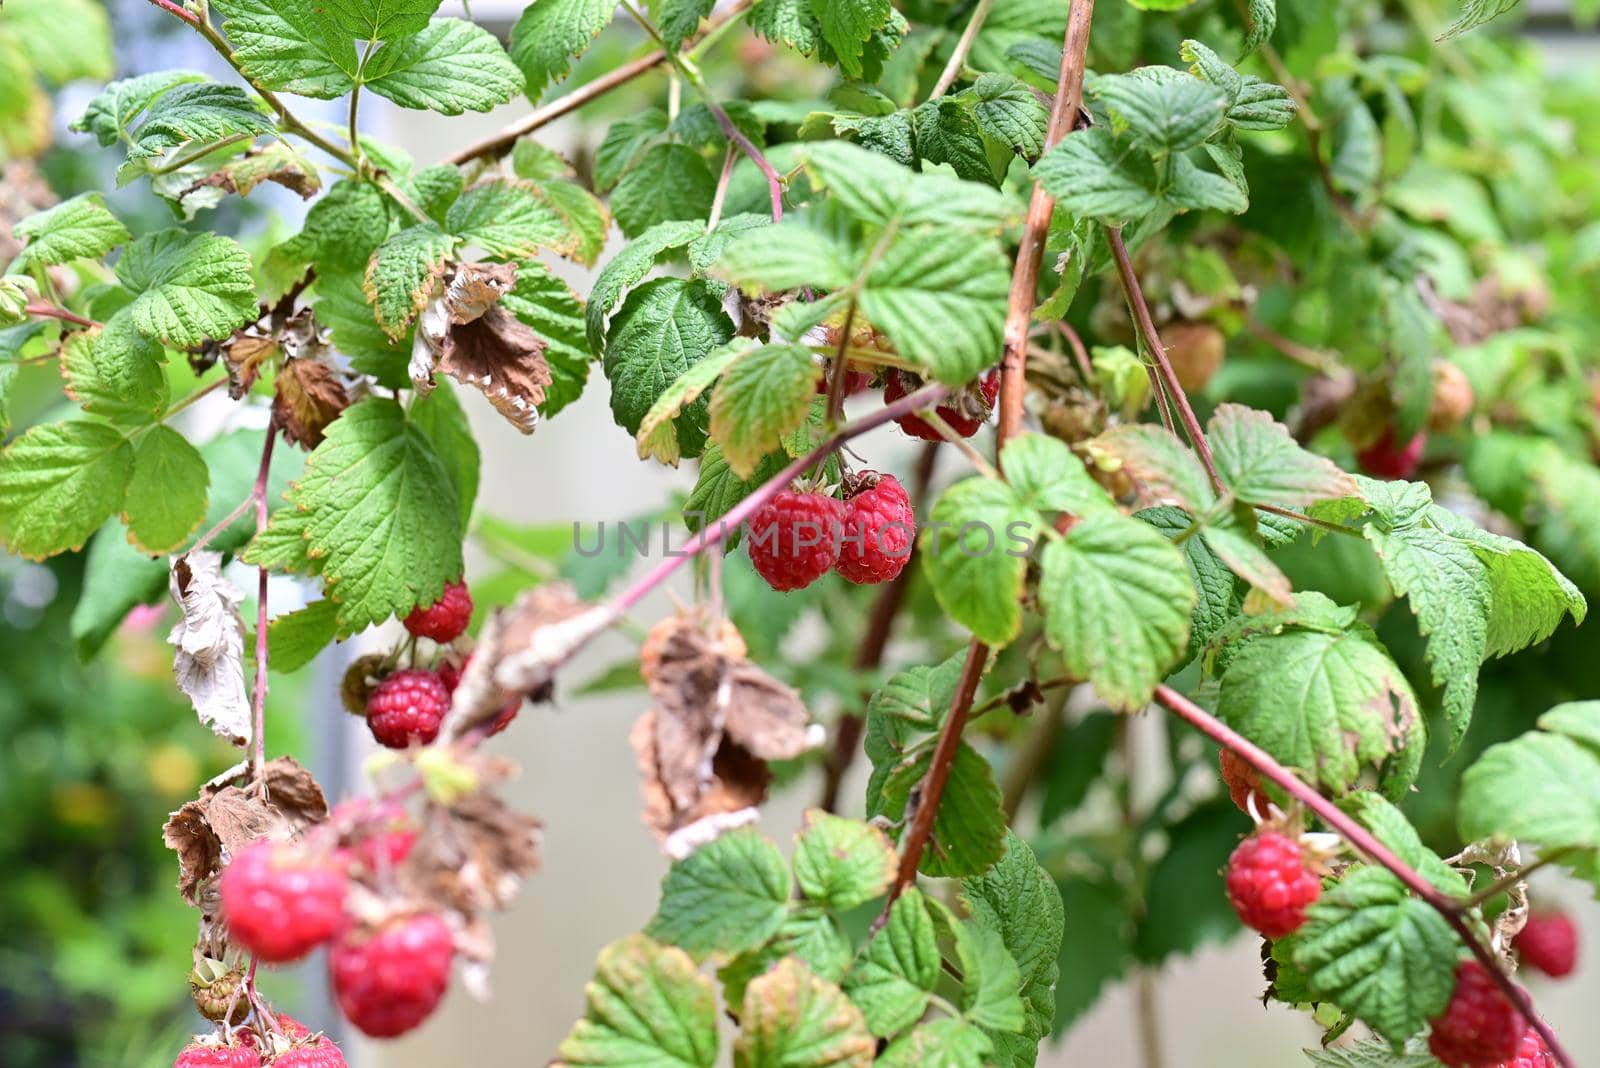 Some ripe rashberries on the bush with a various of focus